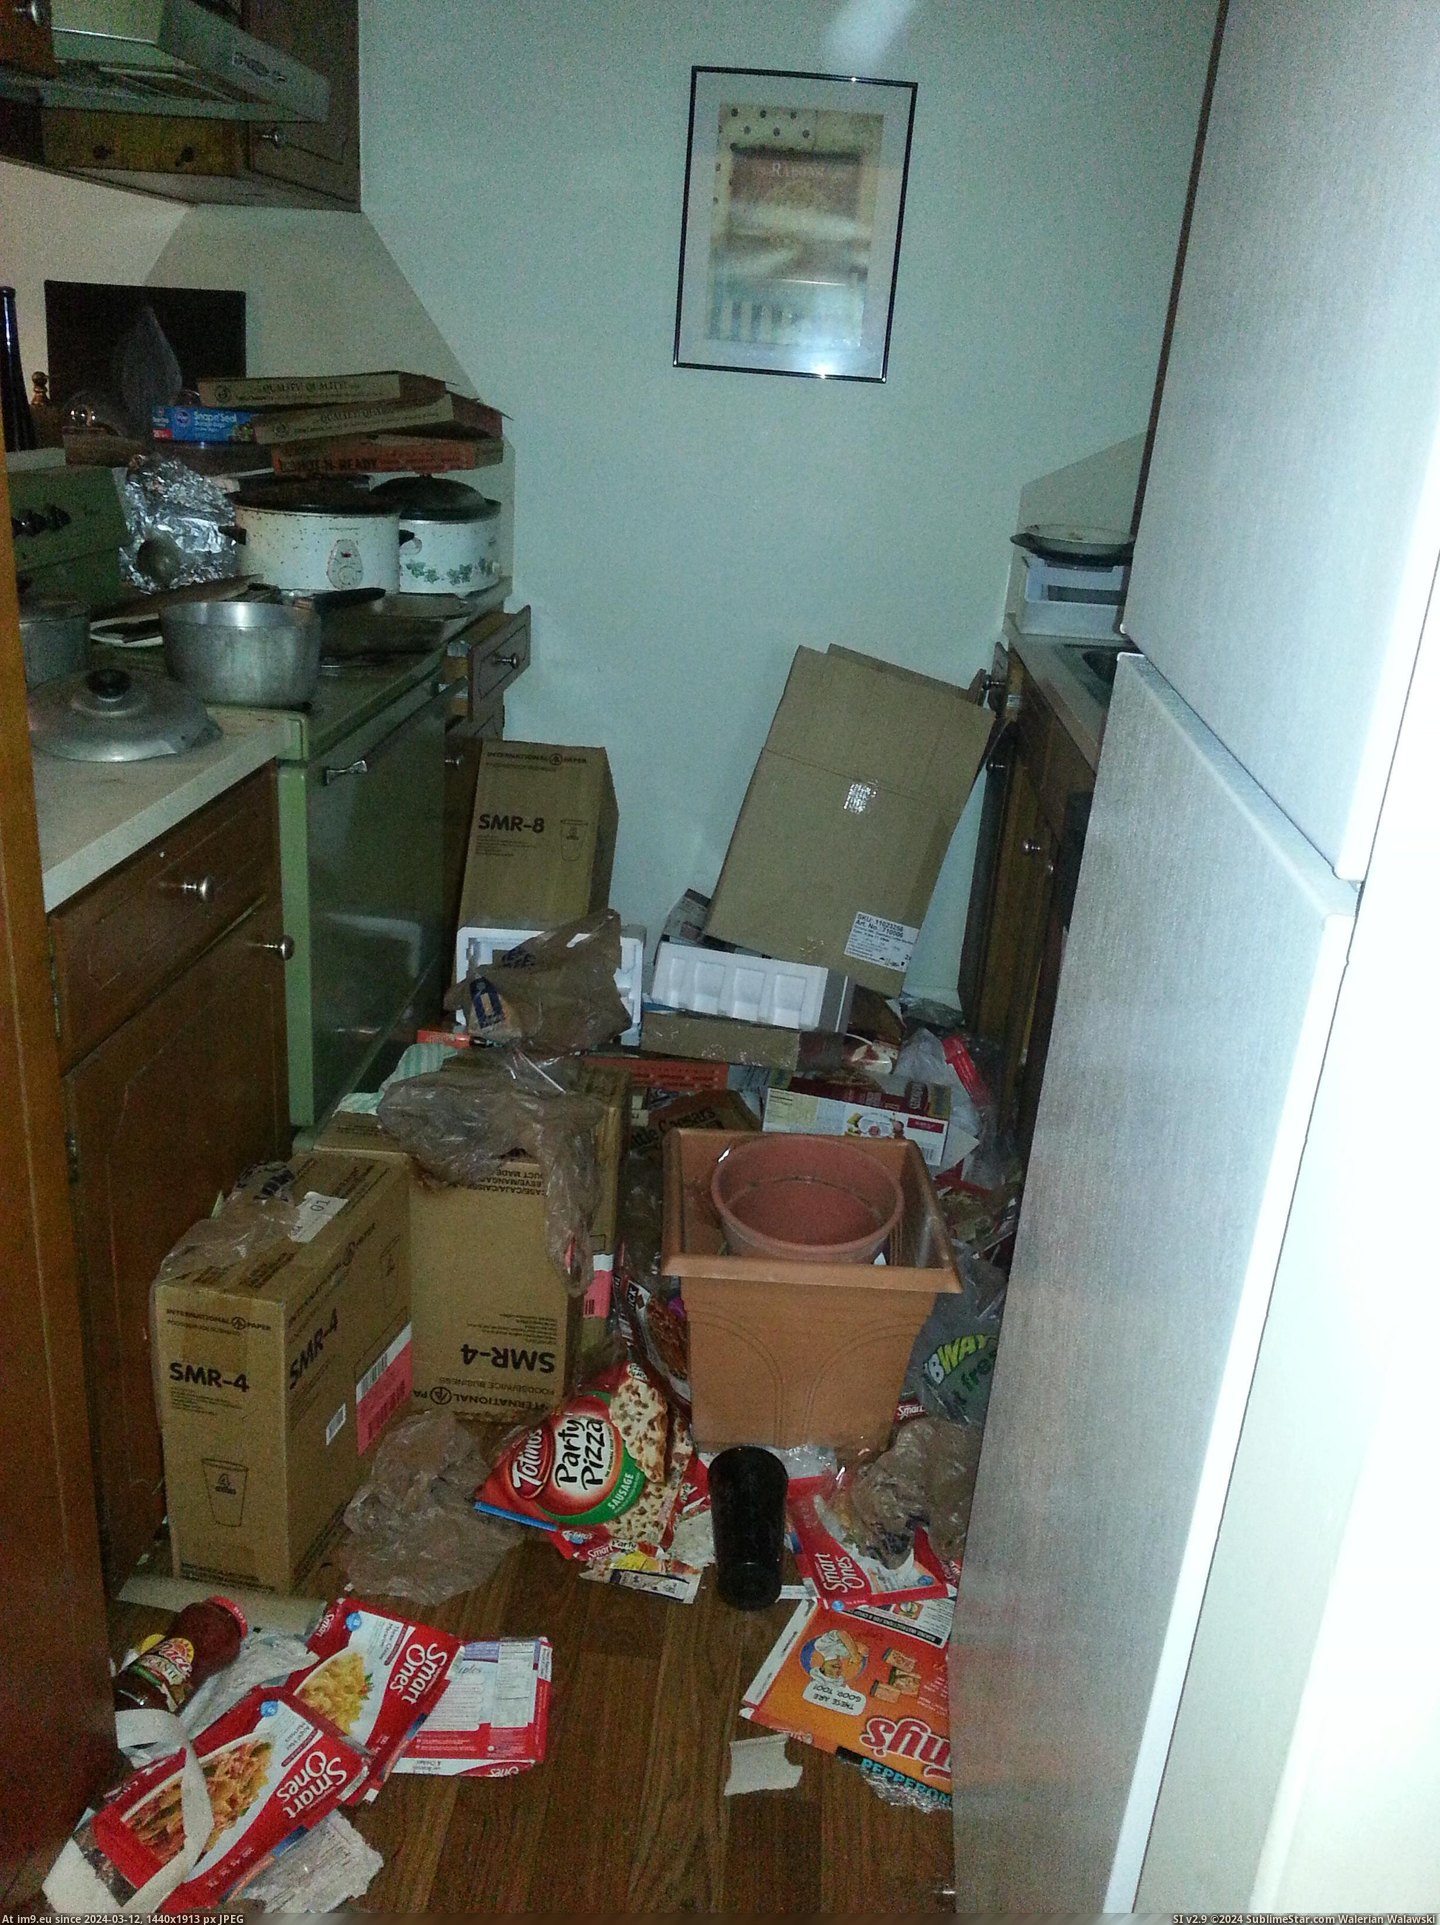 #For #Had #Bit #Brother #Apartment #Drove #Funk #Called #Hours #Walk #Clean [Pics] My brother had been in a bit of a funk. He called me for help to clean his apartment. I drove 4 hours to walk into this.  Pic. (Bild von album My r/PICS favs))